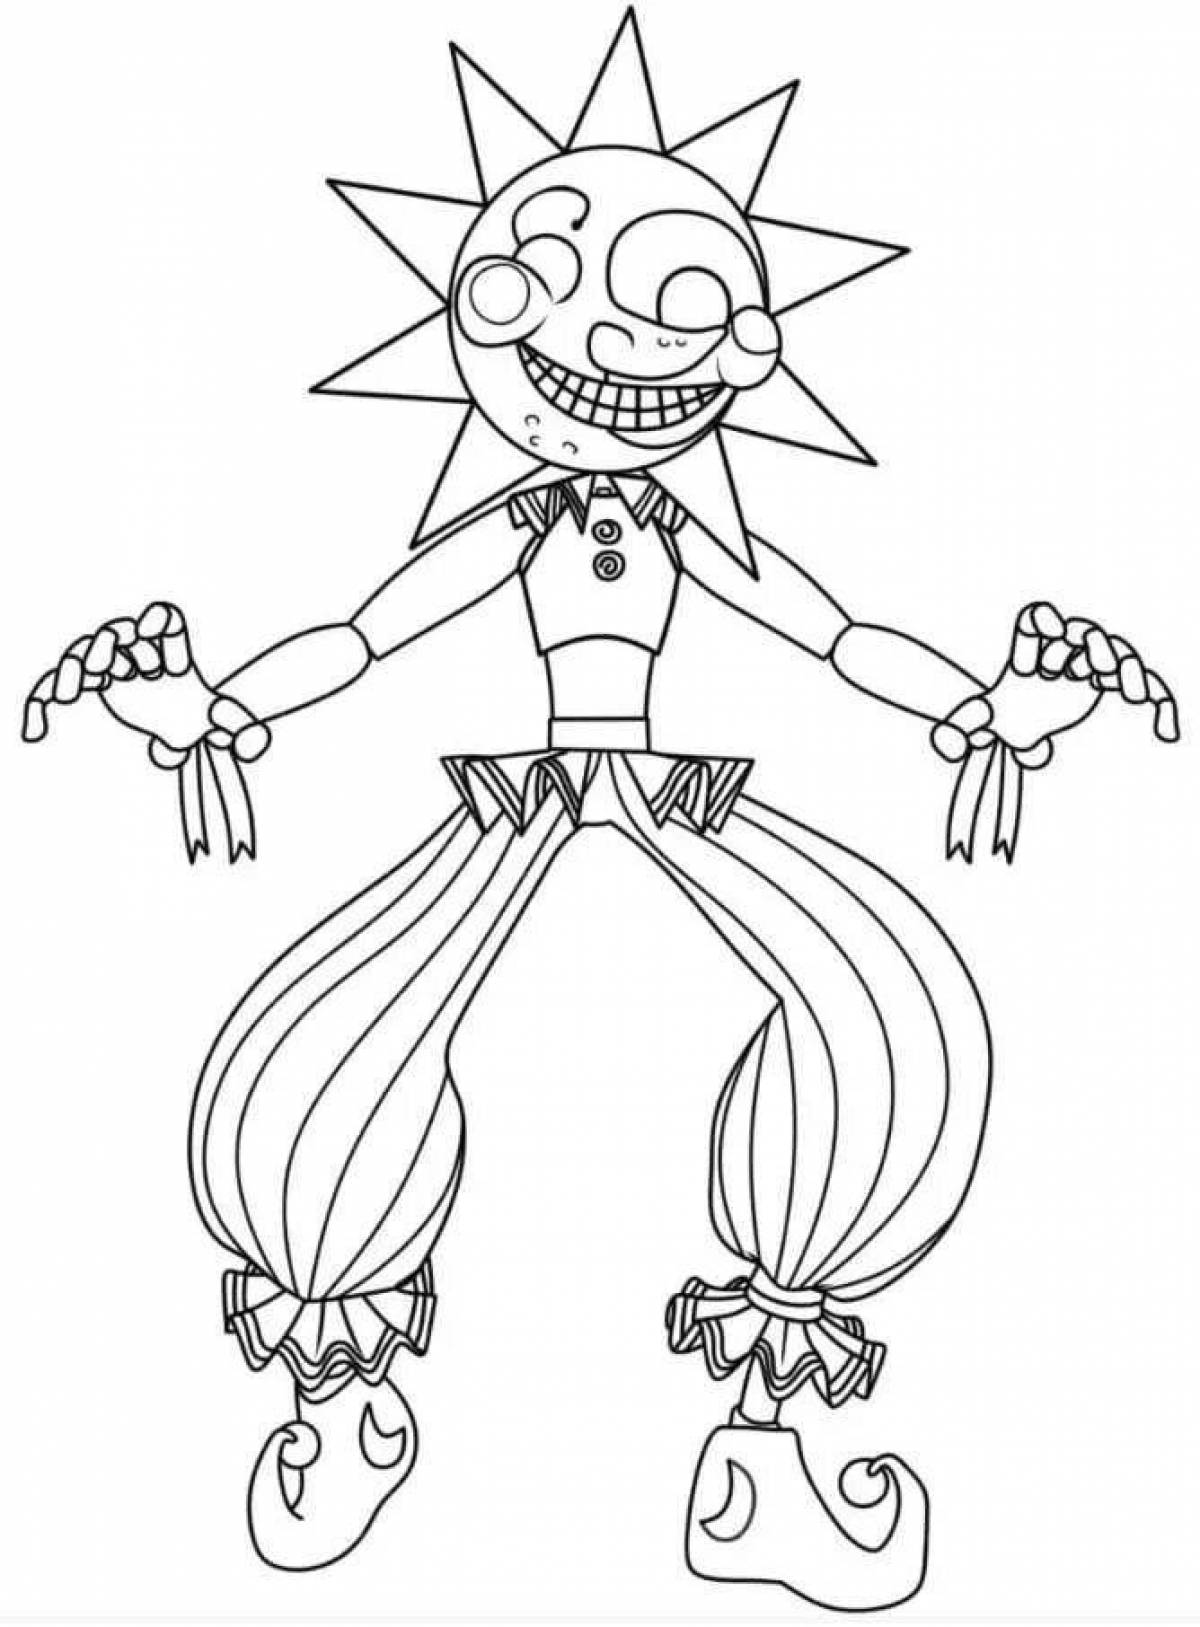 Fnaf glowing sun and moon coloring book